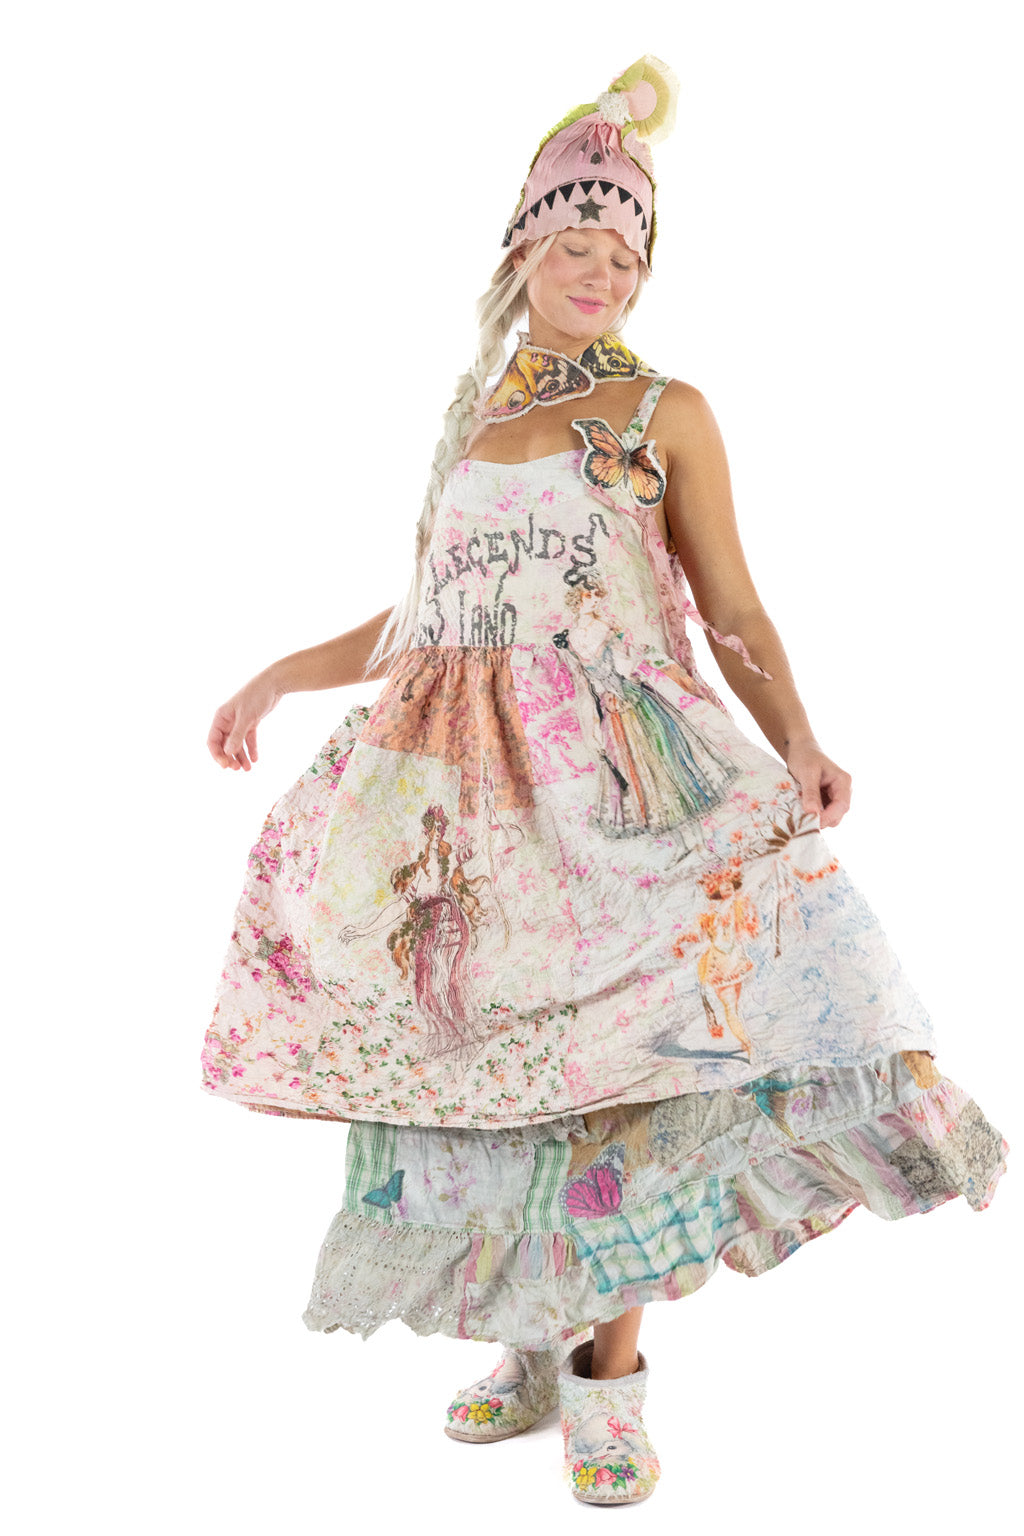 Magnolia Pearl Clothing Patchwork Fairytale Skirt 155 - The